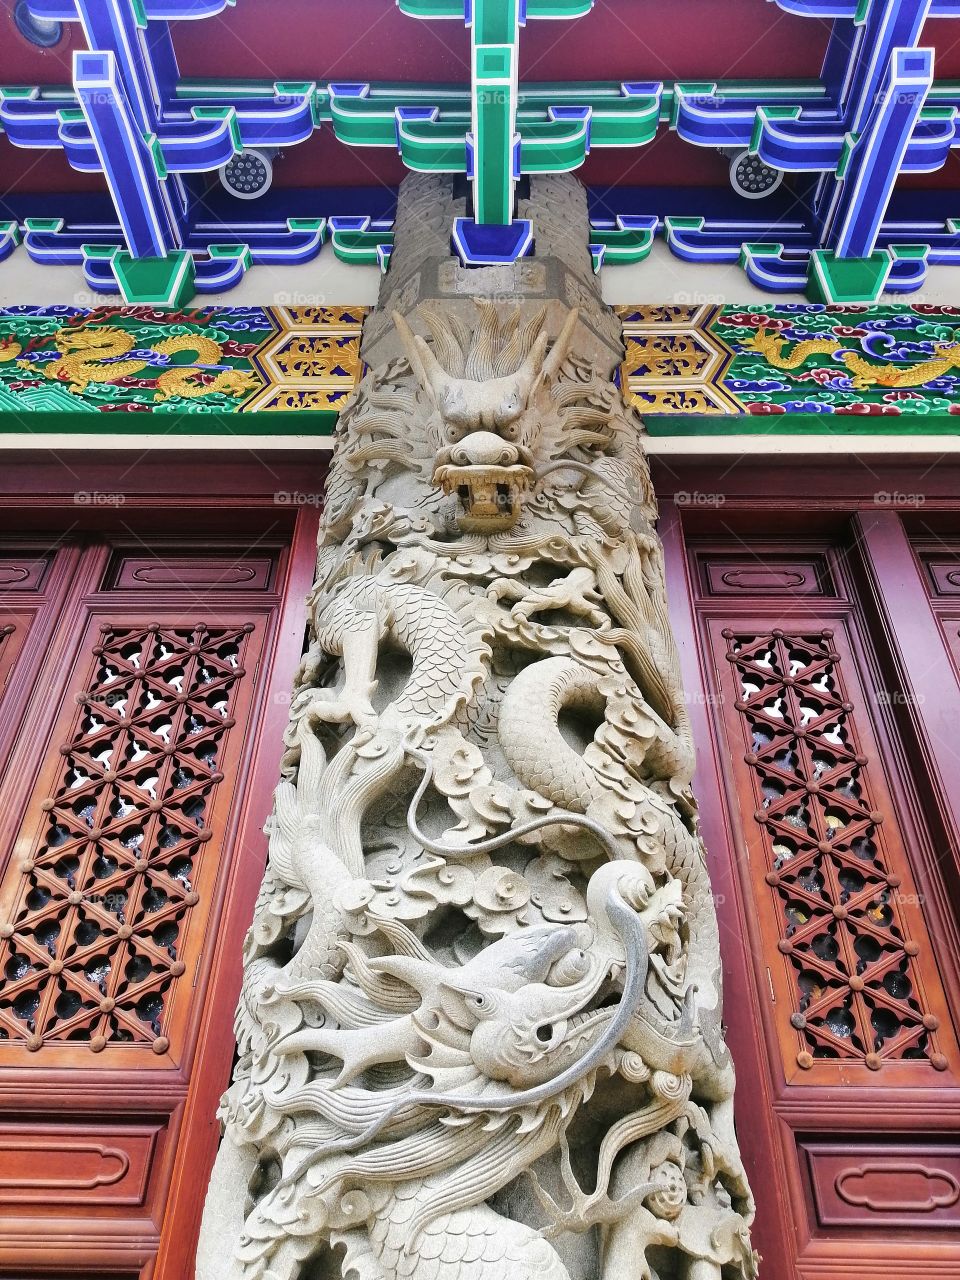 One of the support pillars of a Chinese monastery depicting the strength and fierceness of the mythical dragon.